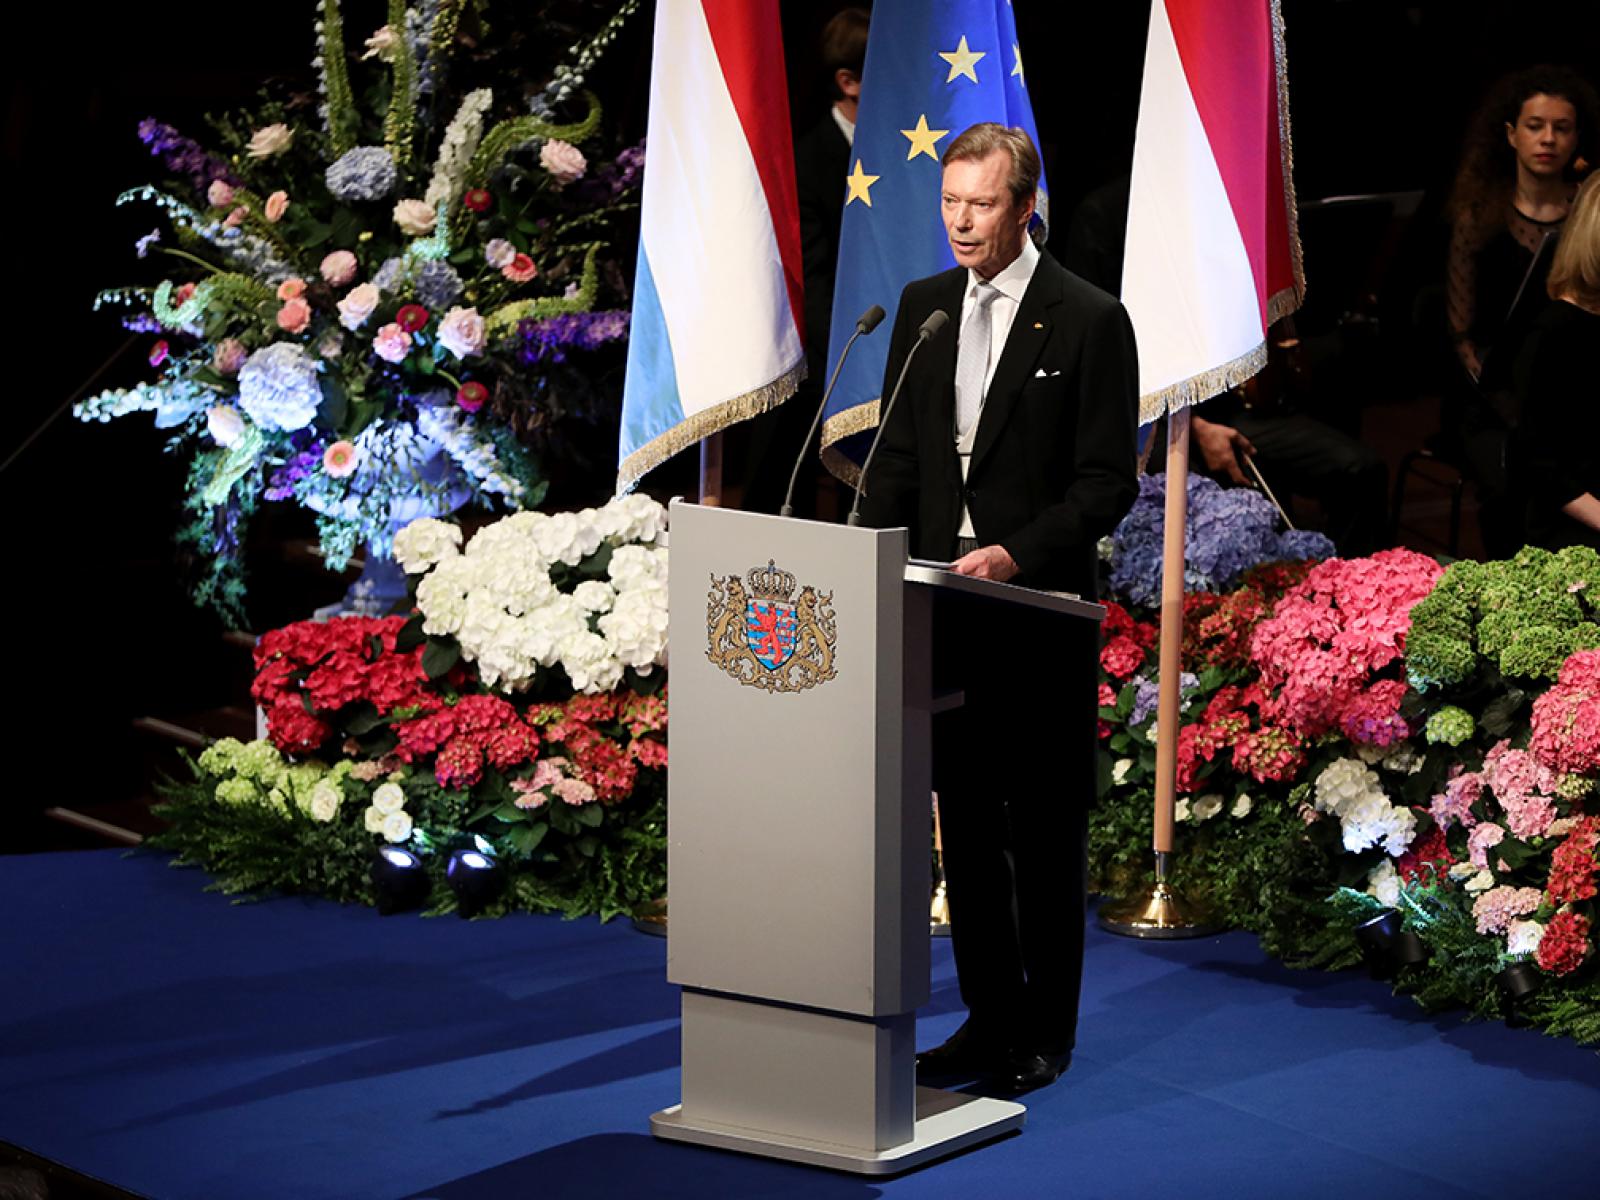 National Day ceremony at the Philharmonie - Traditional speech of the Grand Duke